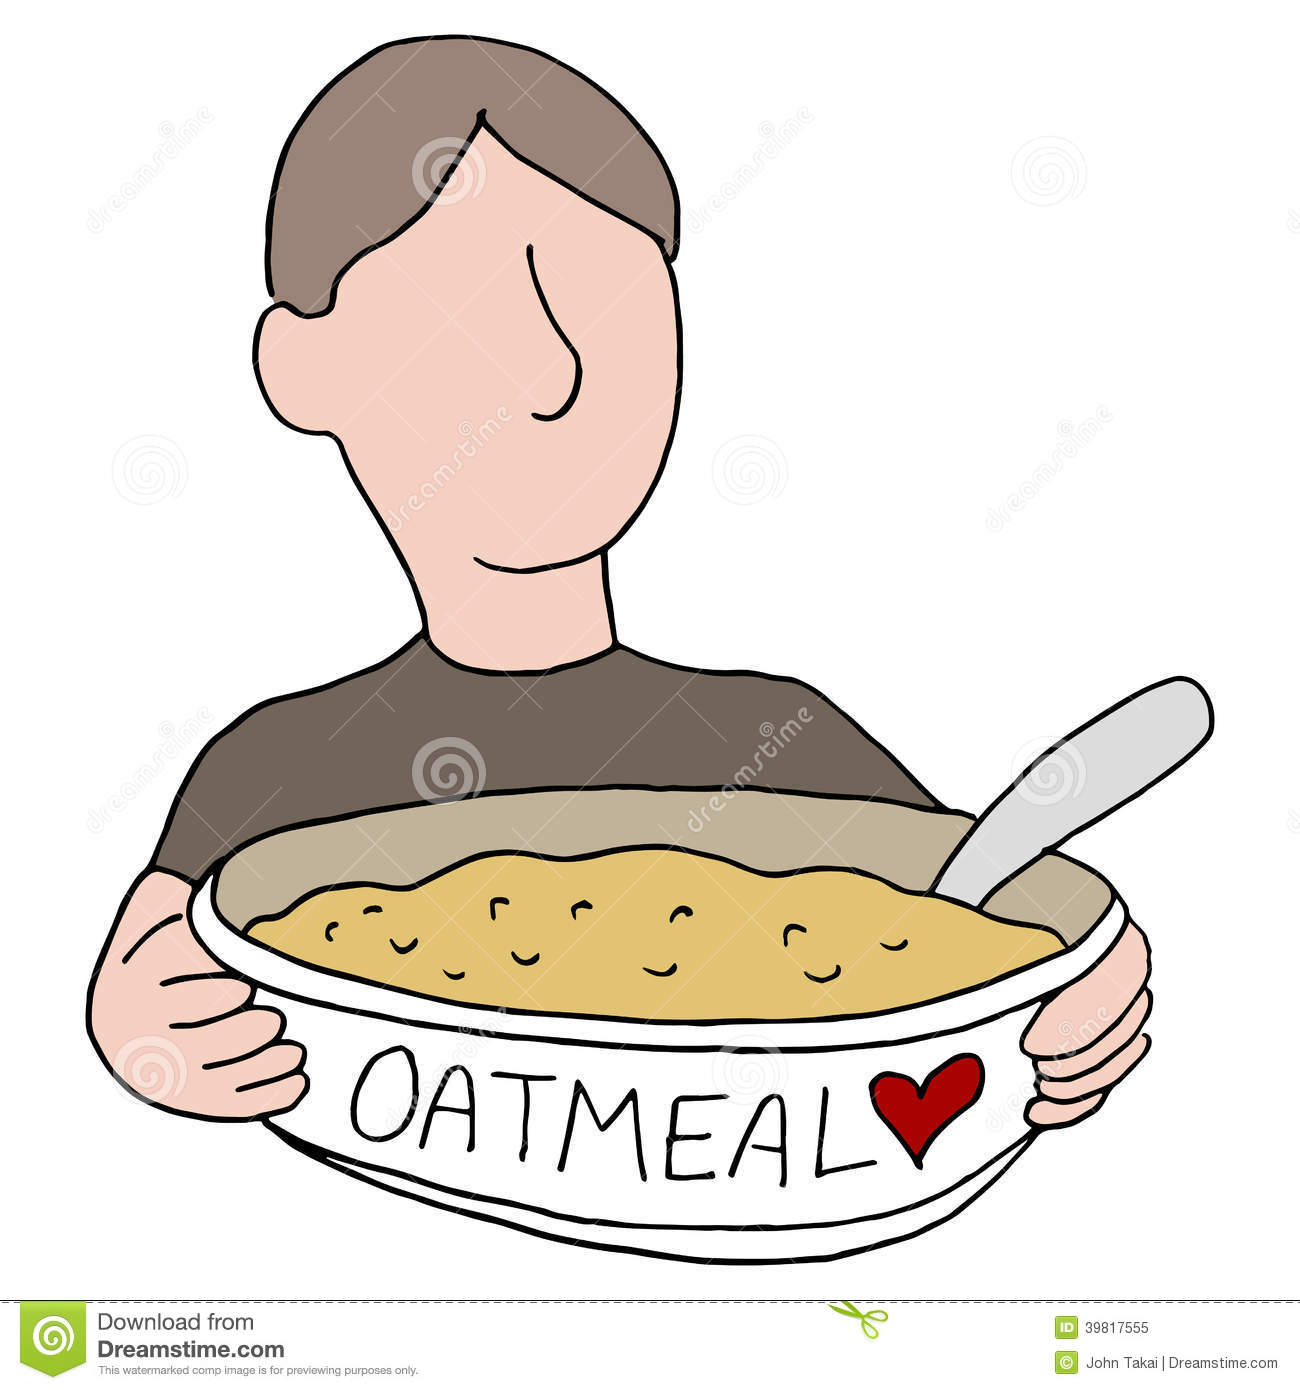 Bowl Of Oatmeal Clipart An Image Of A Man Eating Heart Healthy Oatmeal